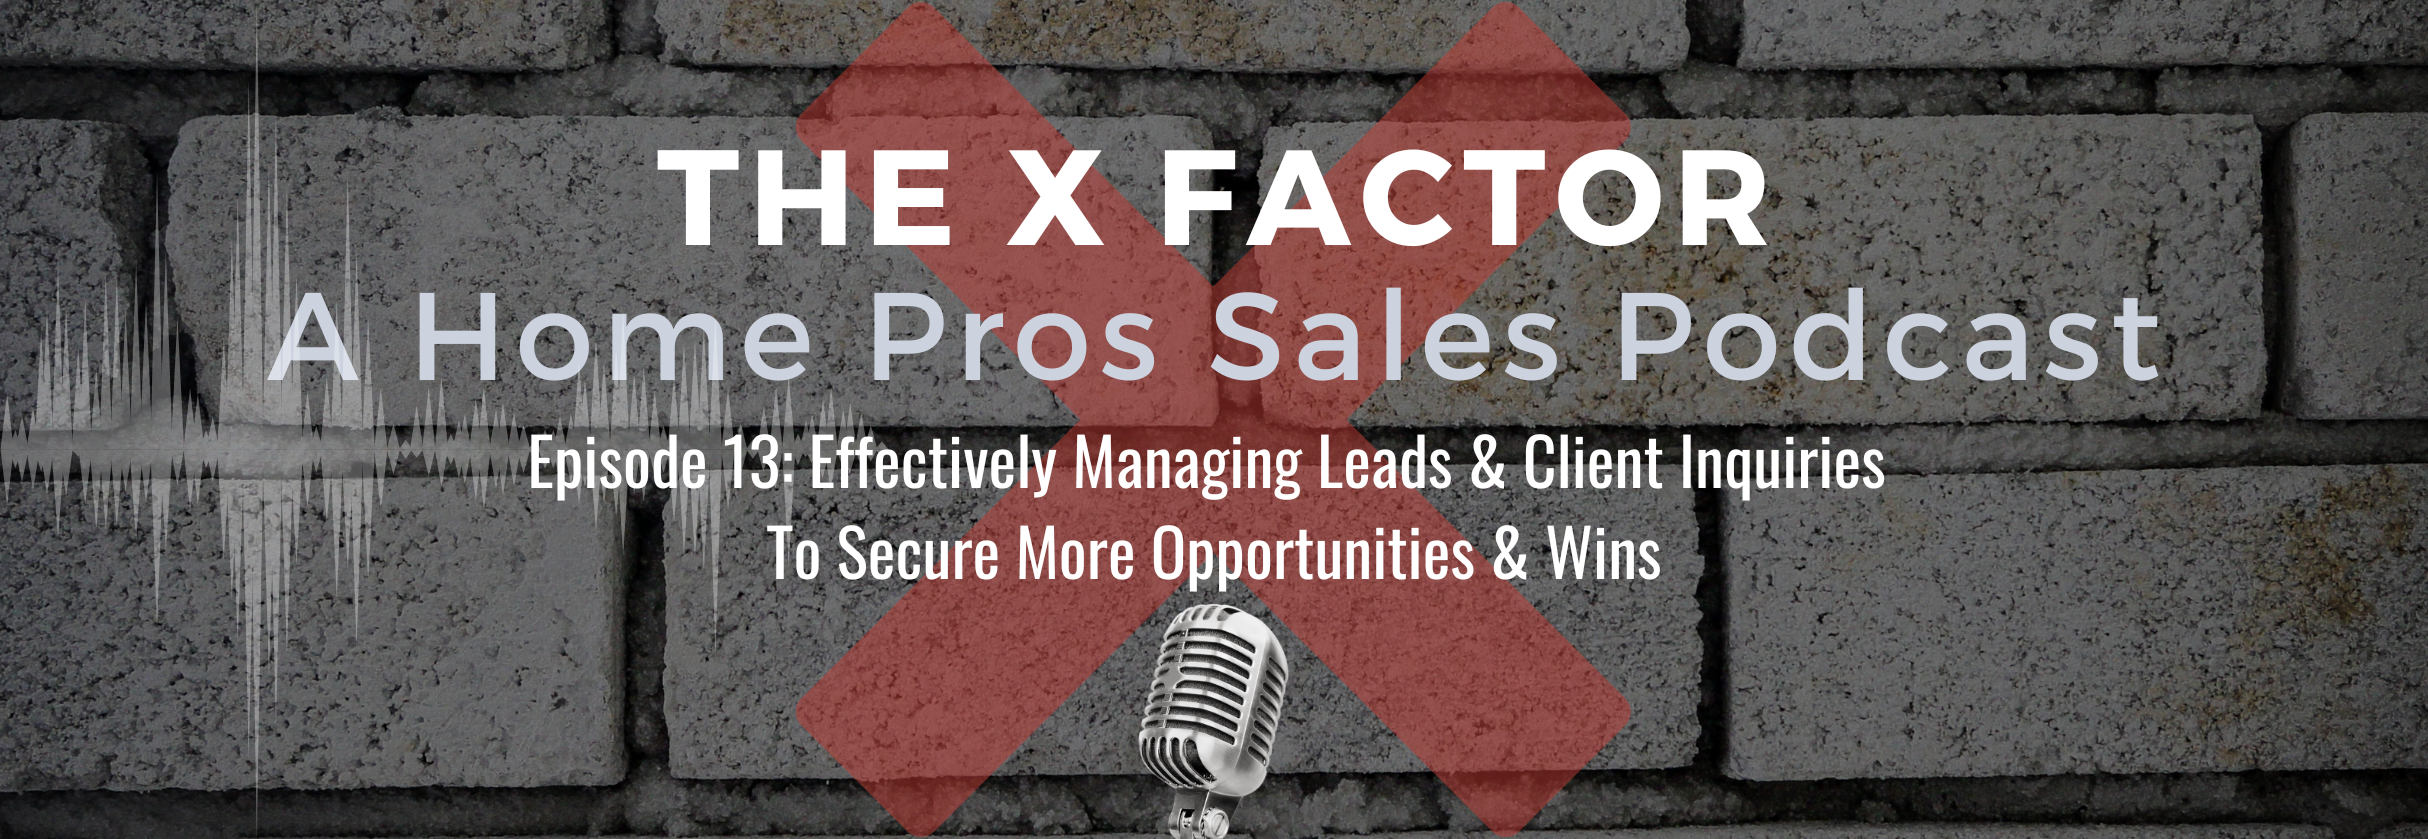 Episode 13 The X Factor A Home Improvement Sales Podcast conXpros